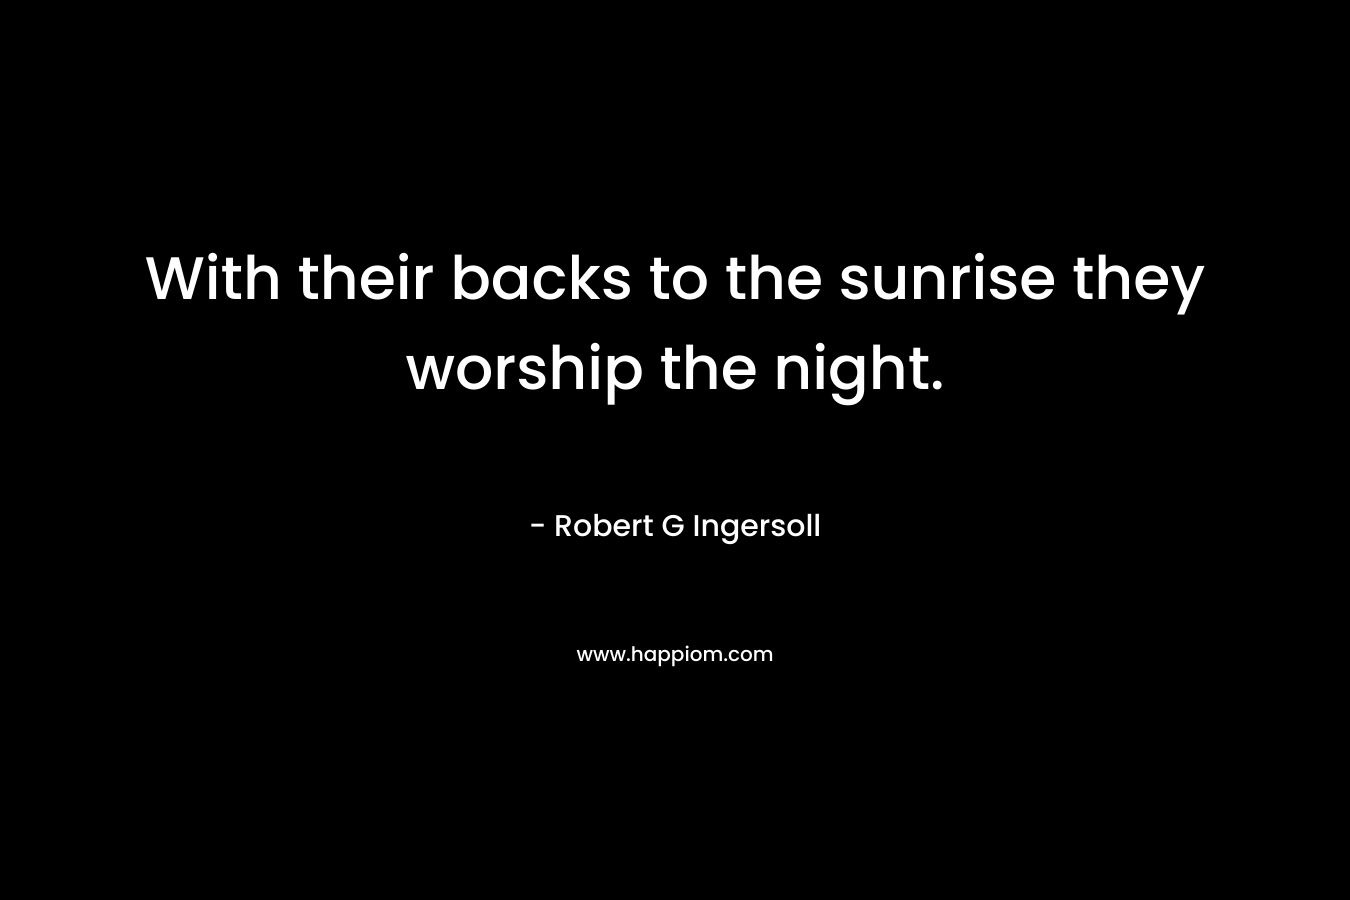 With their backs to the sunrise they worship the night. – Robert G Ingersoll